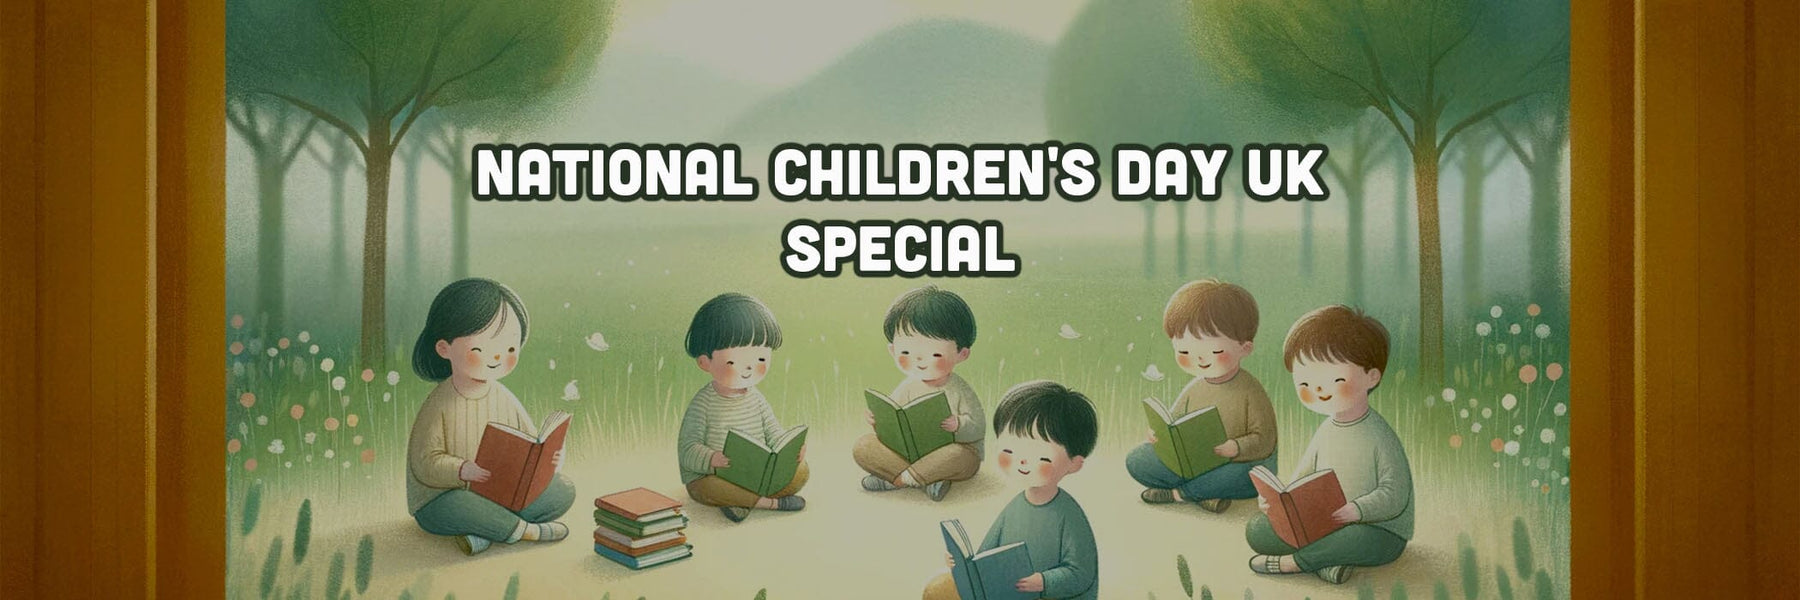 10 Books Every Child Should Read